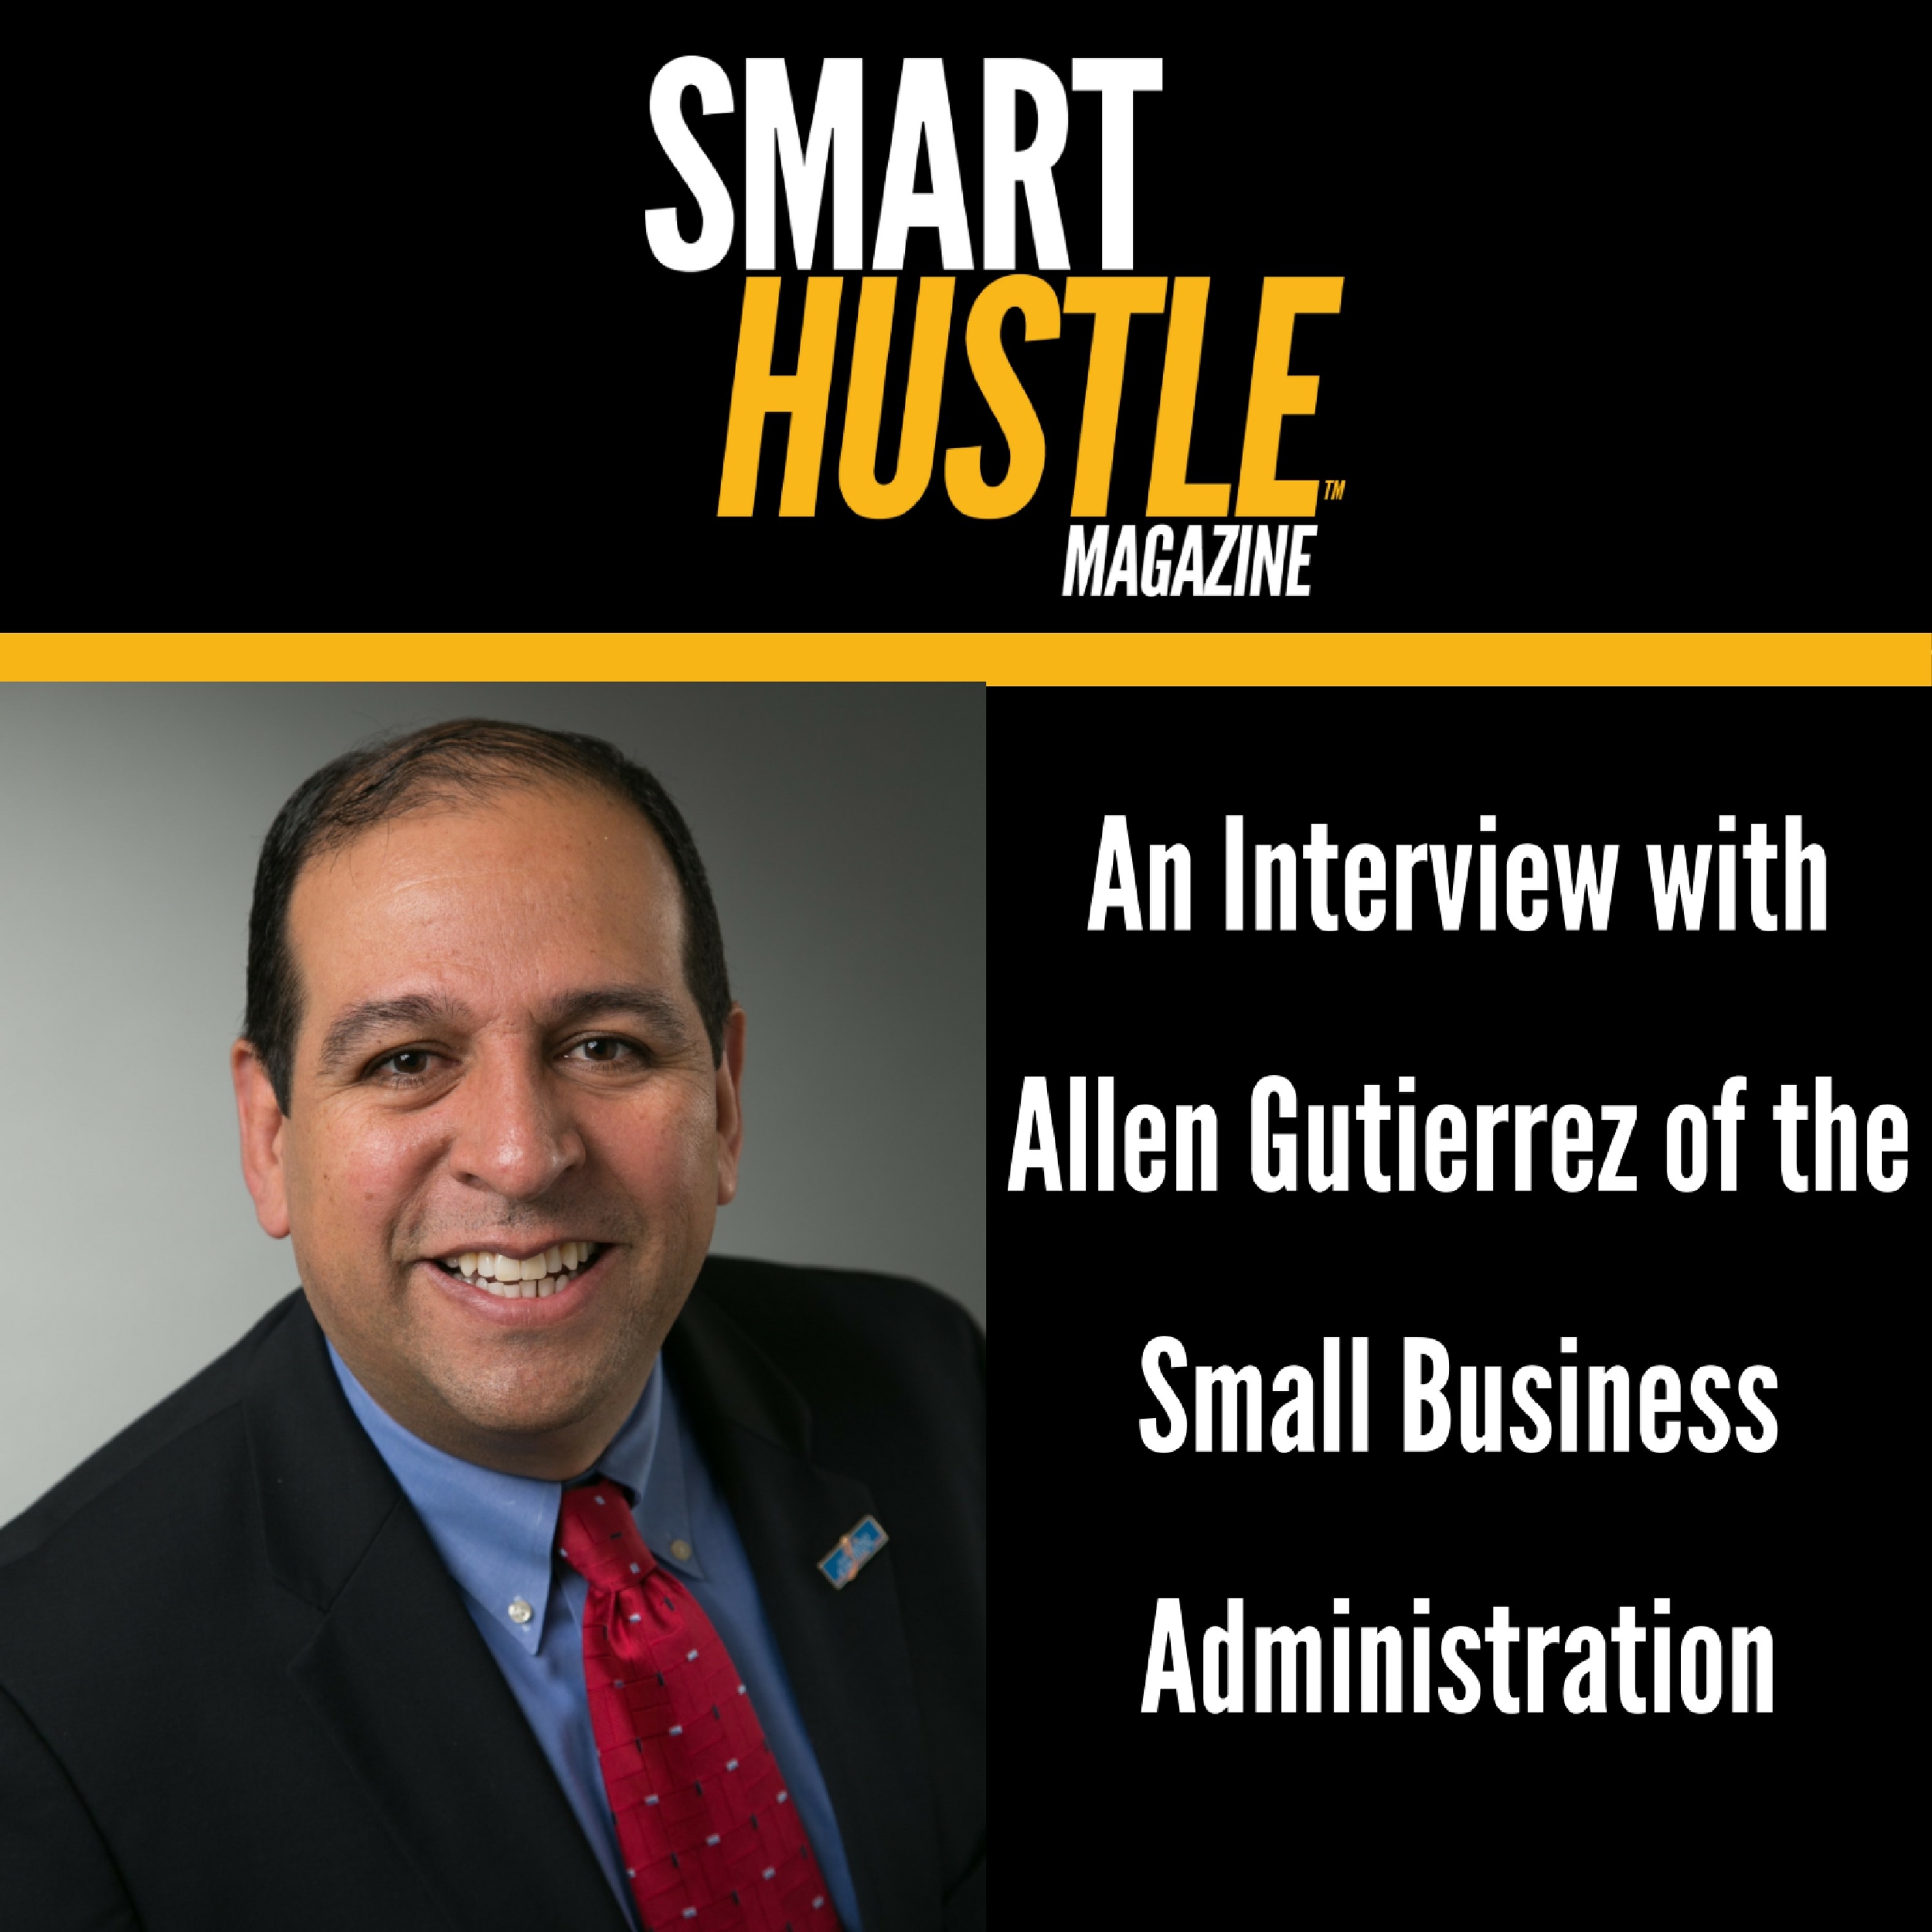 Allen Gutierrez Talks the Small Business Administration and the Entrepreneurial Spirit